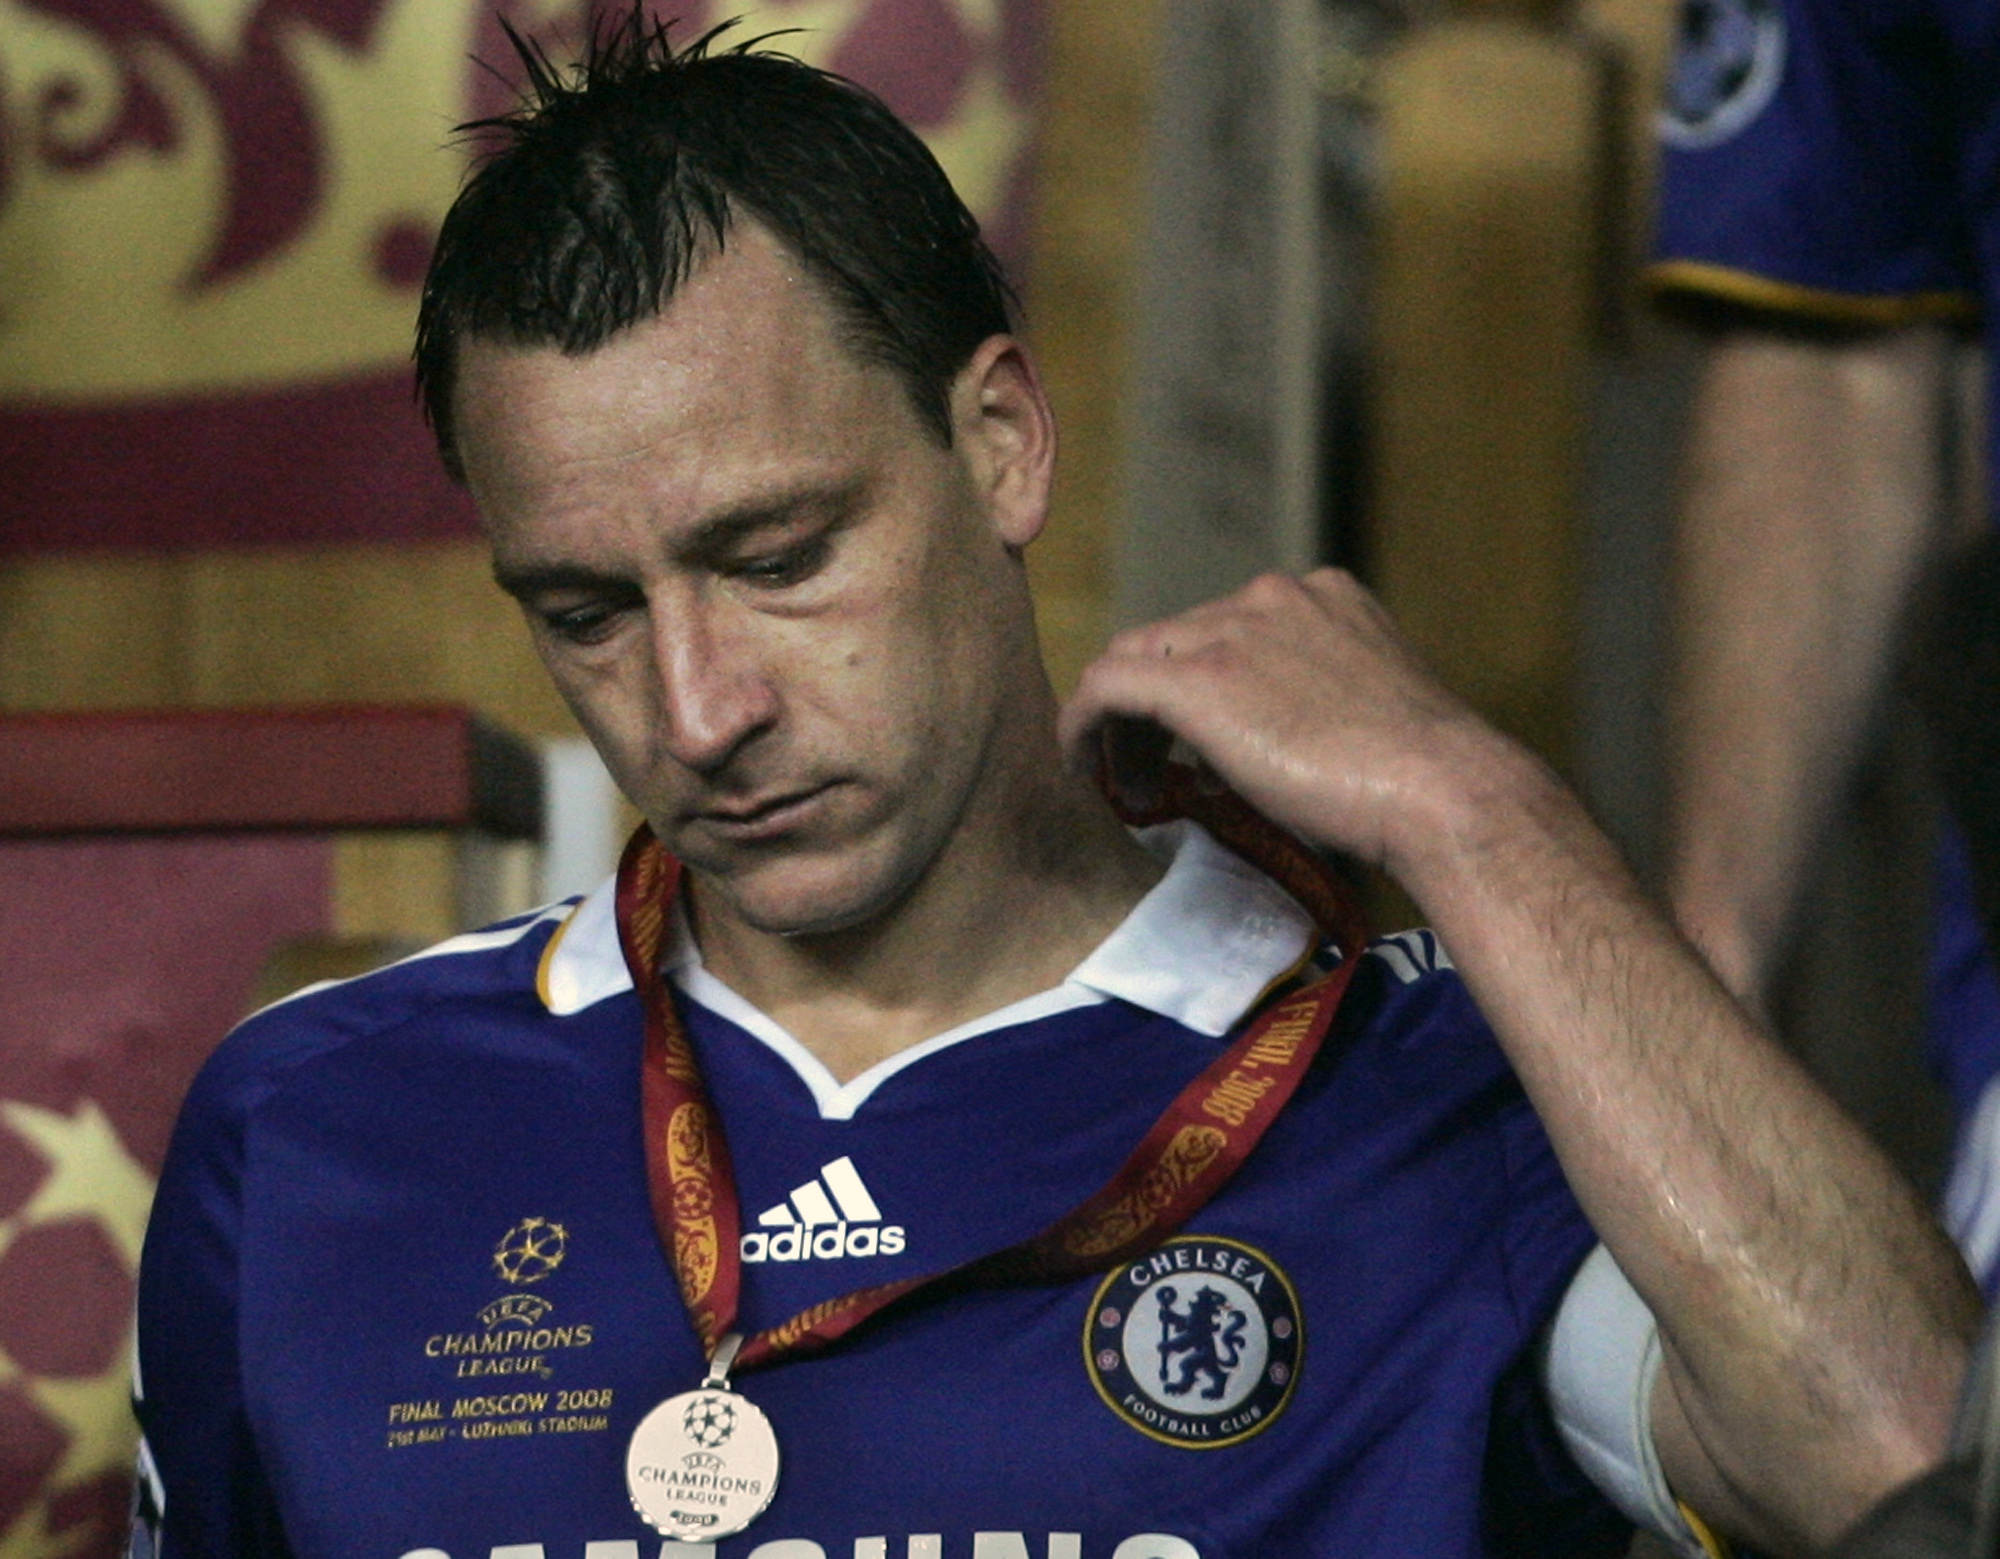 Champions League, John Terry, Straffmiss, Chelsea, Manchester United